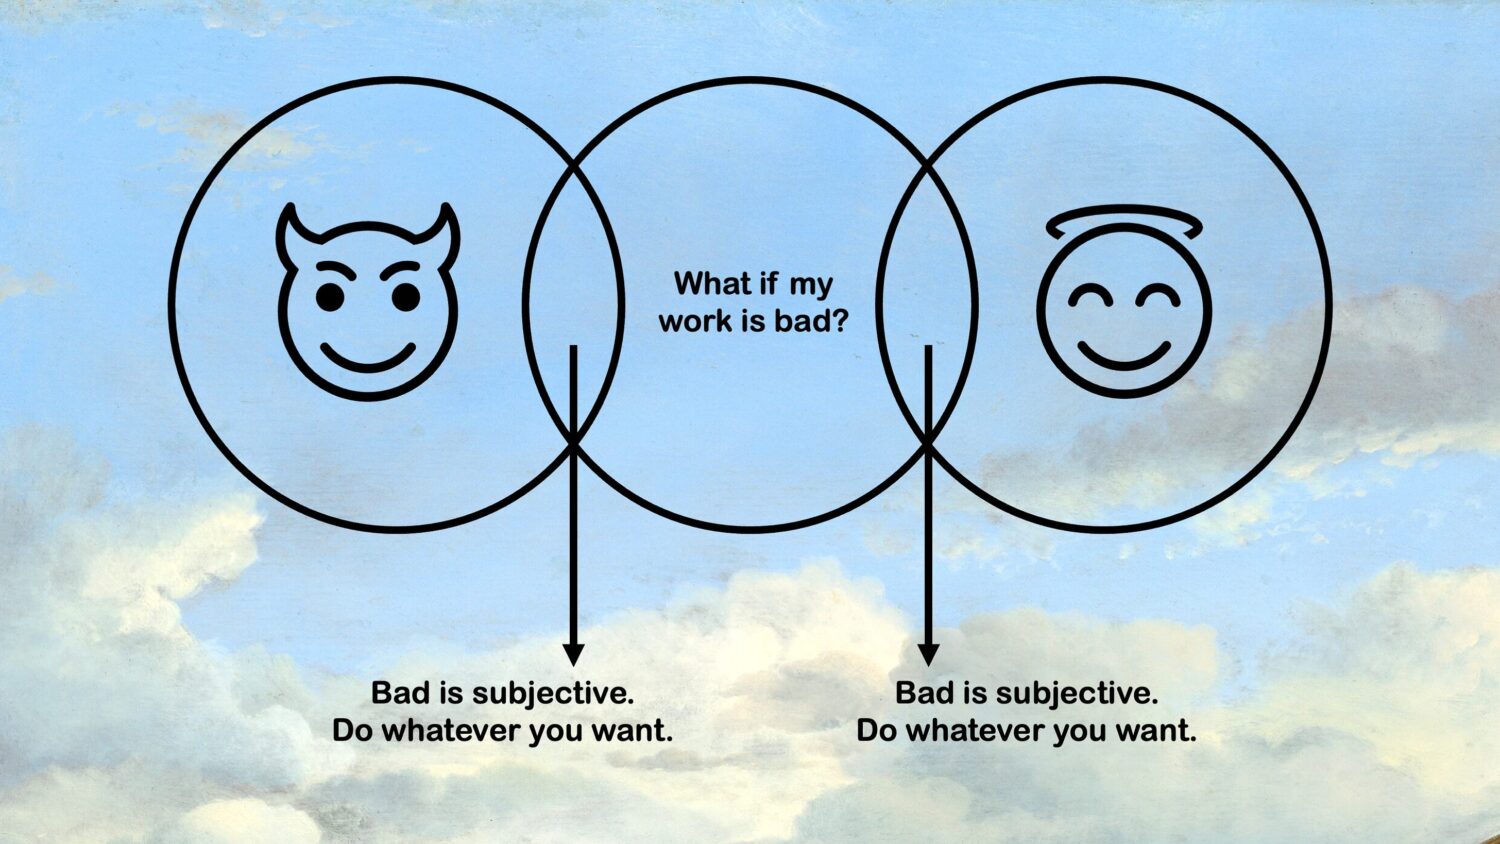 Illustration with text: What if my work is bad? Bad is subjective. Do whatever you want.